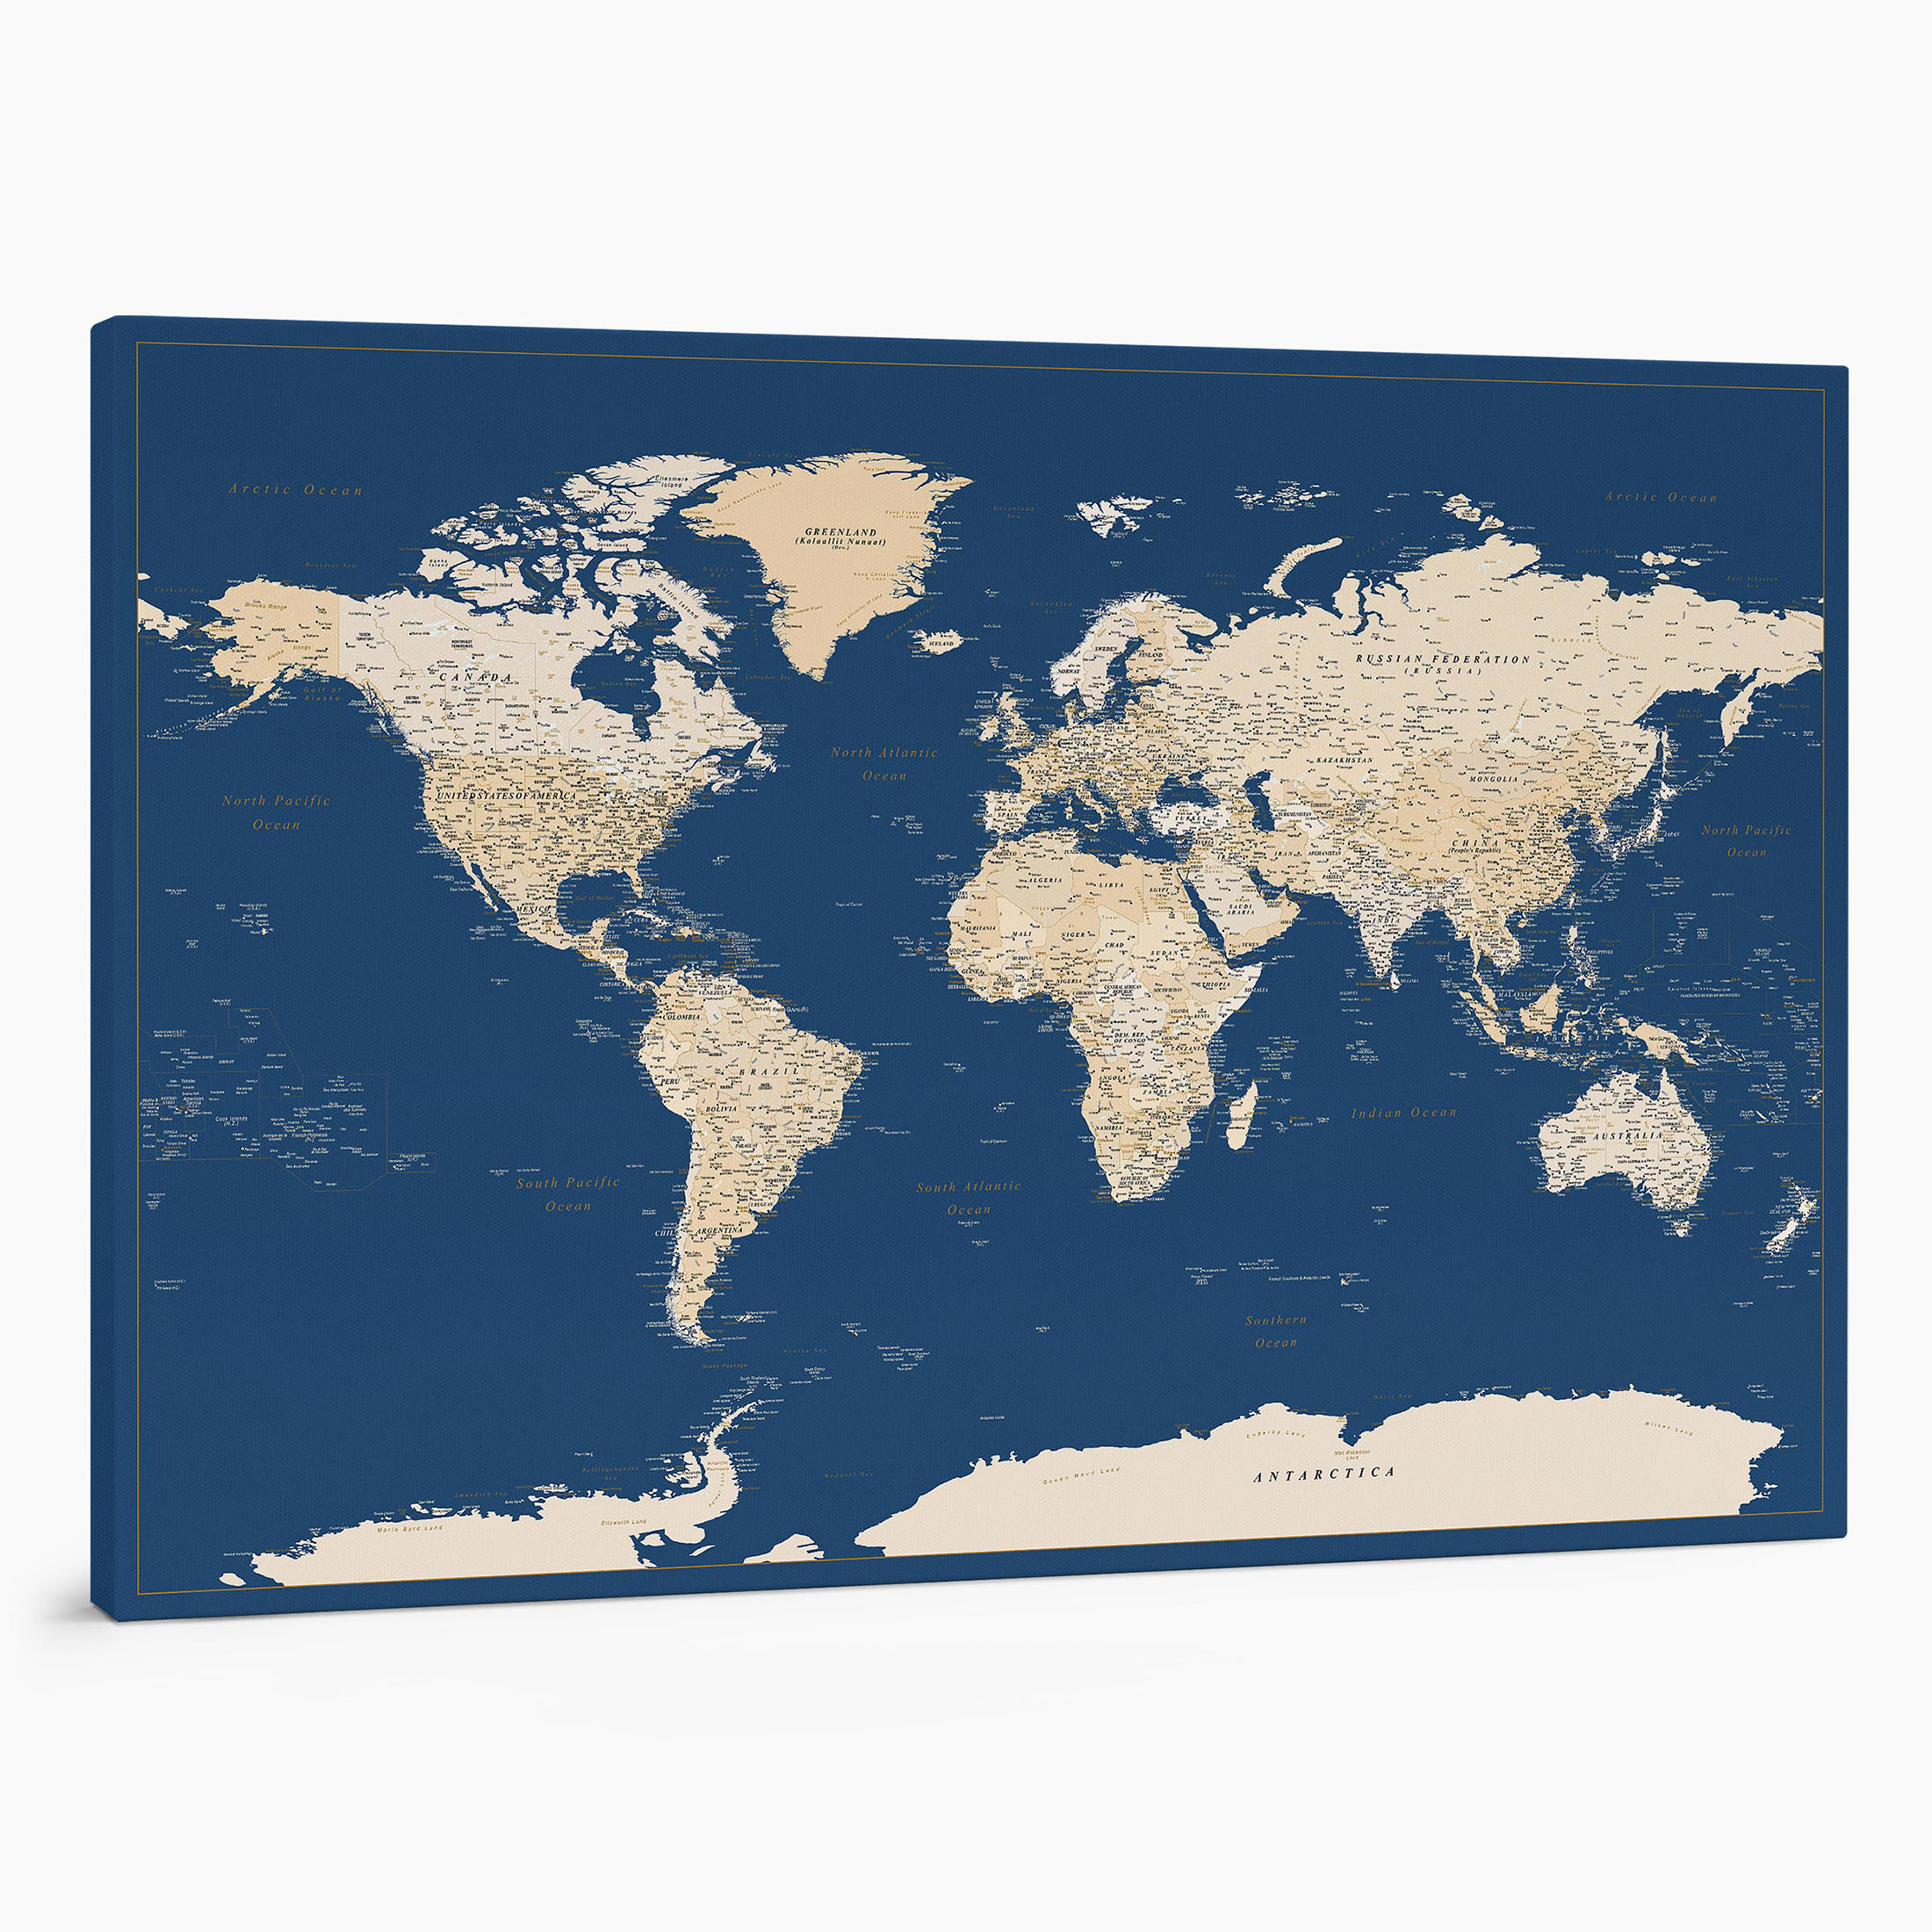 World Travel Map Pin Board with Push Pins. Where have you already been, and  where will your wanderlust take you next?